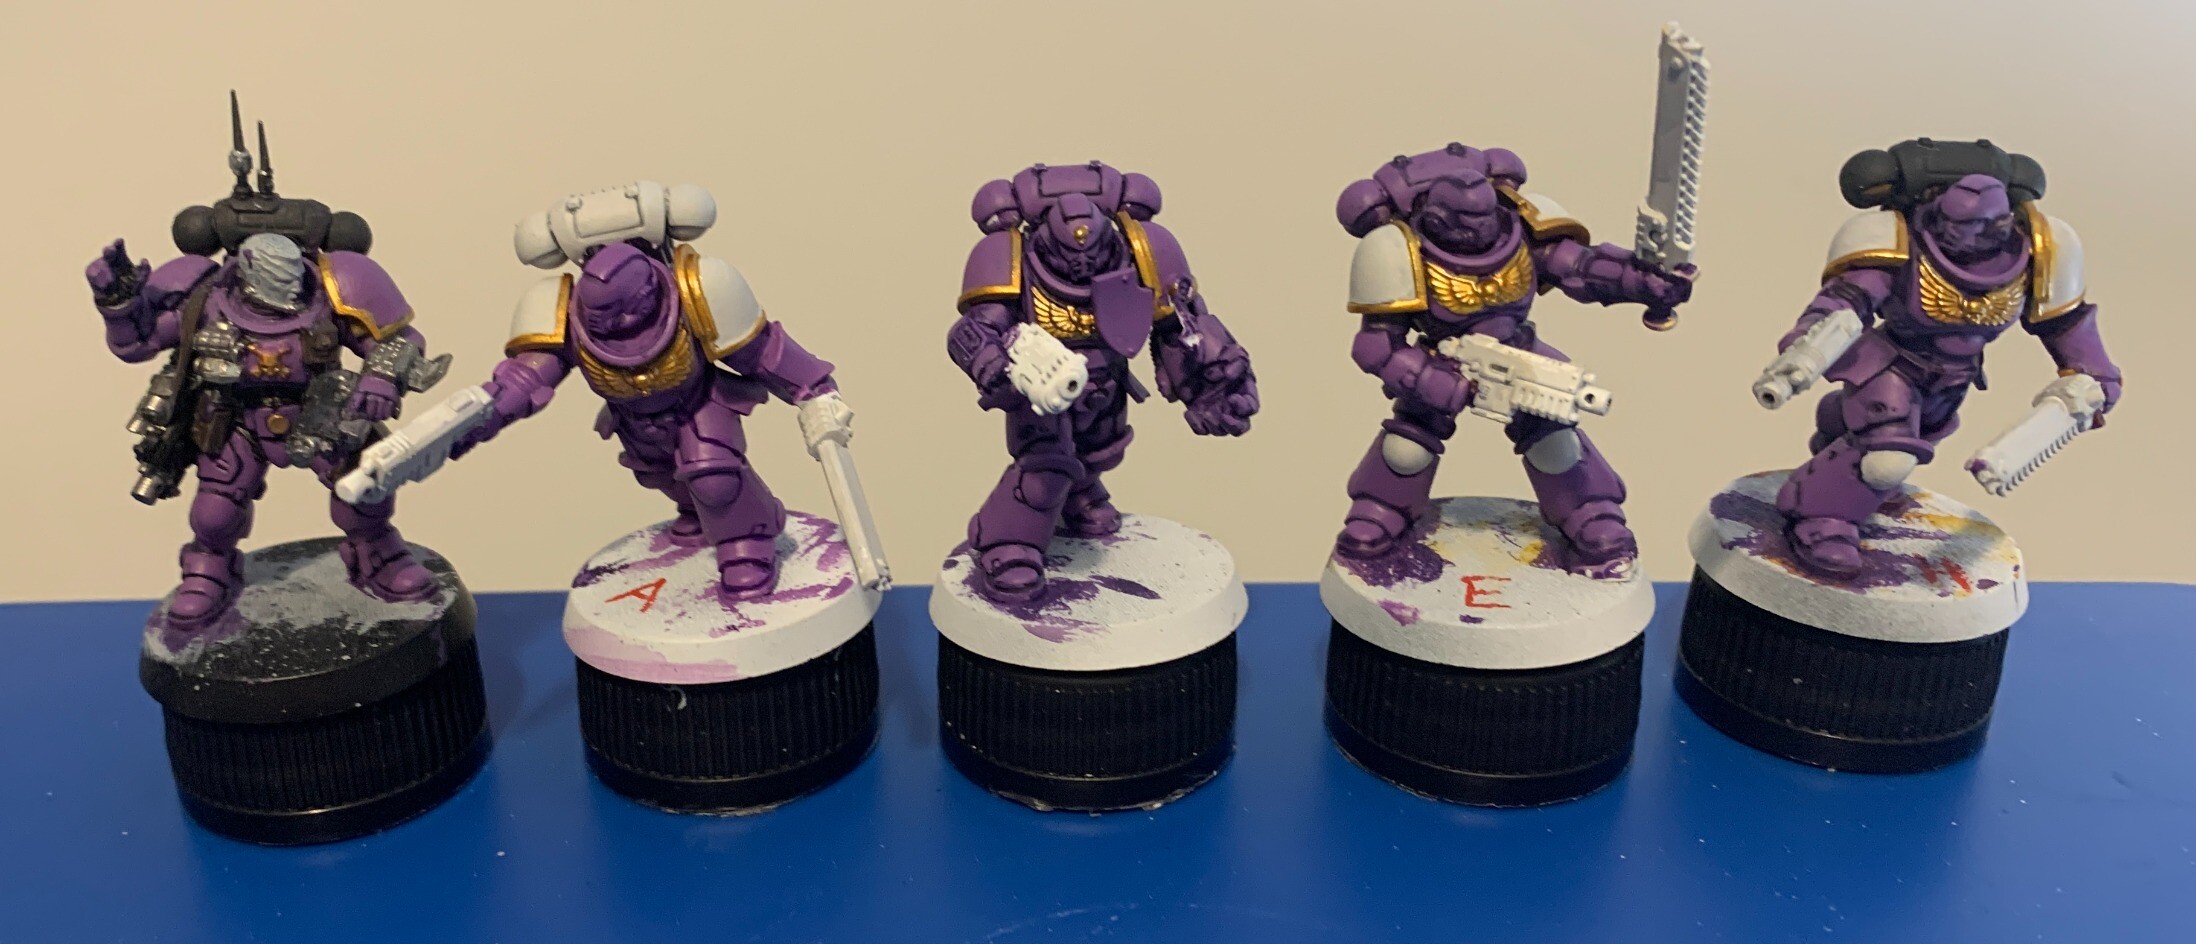 5 space purple space marines in a line with variations of accent colours. The purple is a middle brightness and appears warm, leaning more red than blue. The trim of the armour is gold. From left to right the variations are: purple pauldrons and black backpack. White pauldrons and white backpack. Purple pauldrons and purple backpack. White pauldrons and knee pads, and a purple backpack. White pauldrons and knee pads with a black backpack. The models are sat on black bottle caps on top of a blue plastic lid.